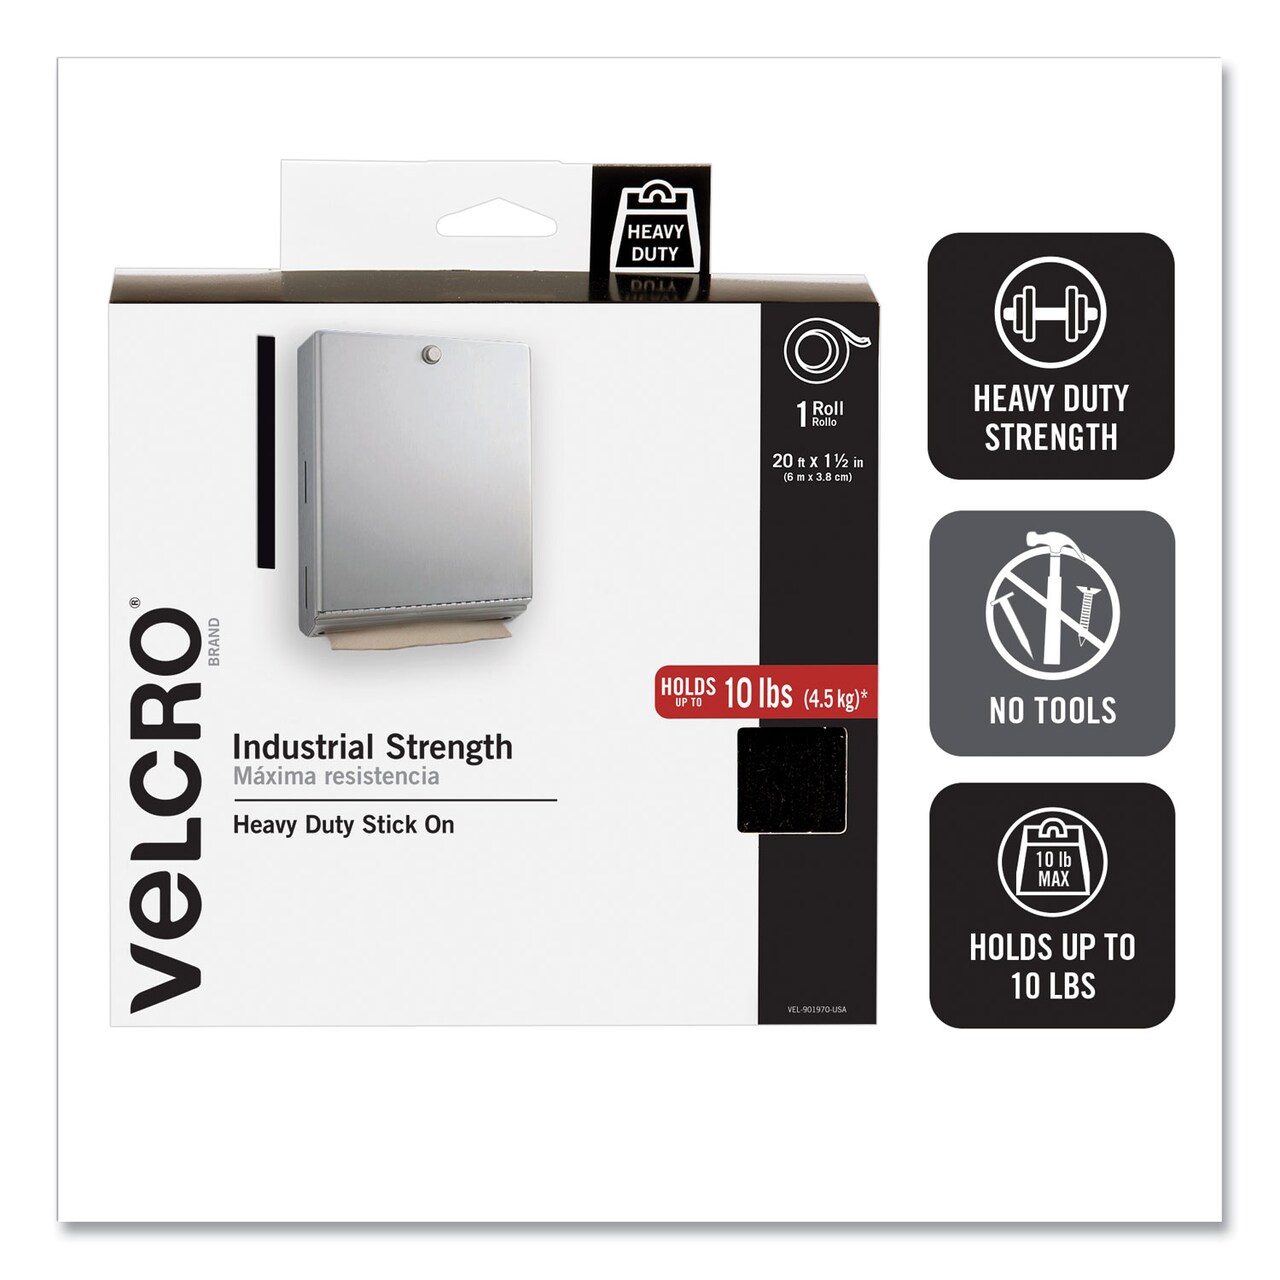 Velcro Industrial-Strength Heavy-Duty Fasteners with Dispenser Box 2 x 15  ft Black